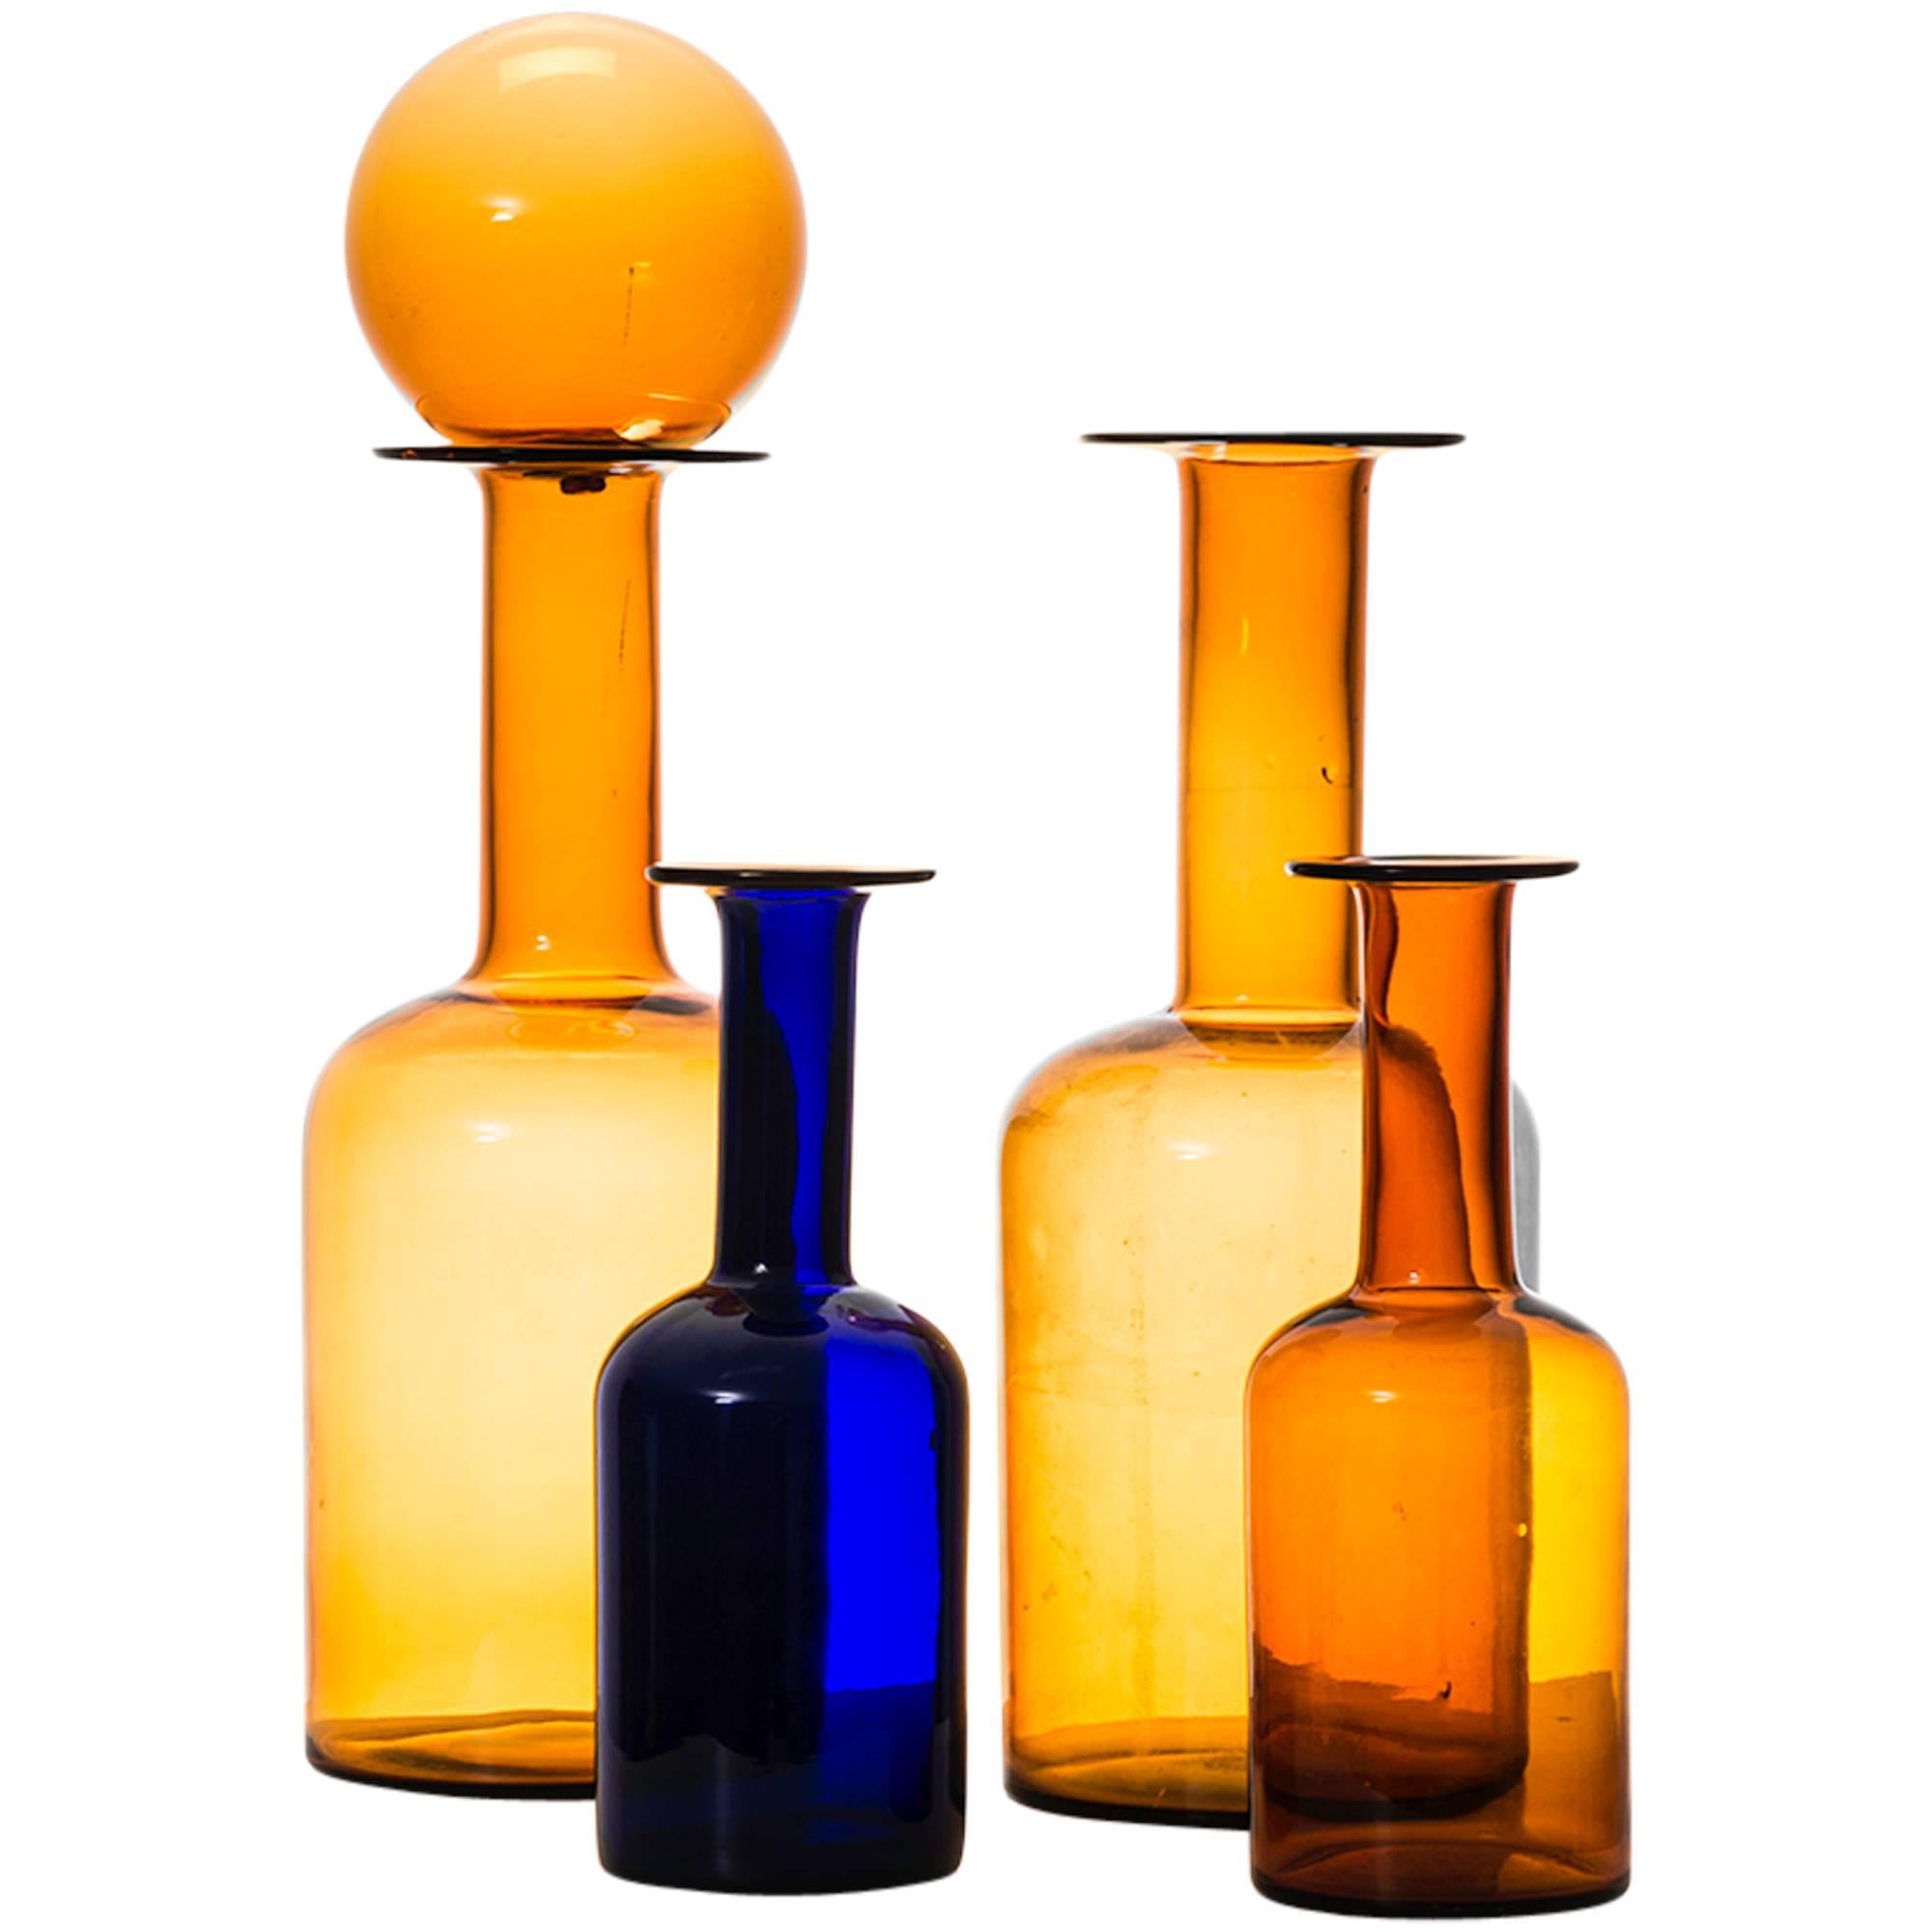 Otto Brauer Glass Vases Produced by Kastrup Holmegaard in Denmark